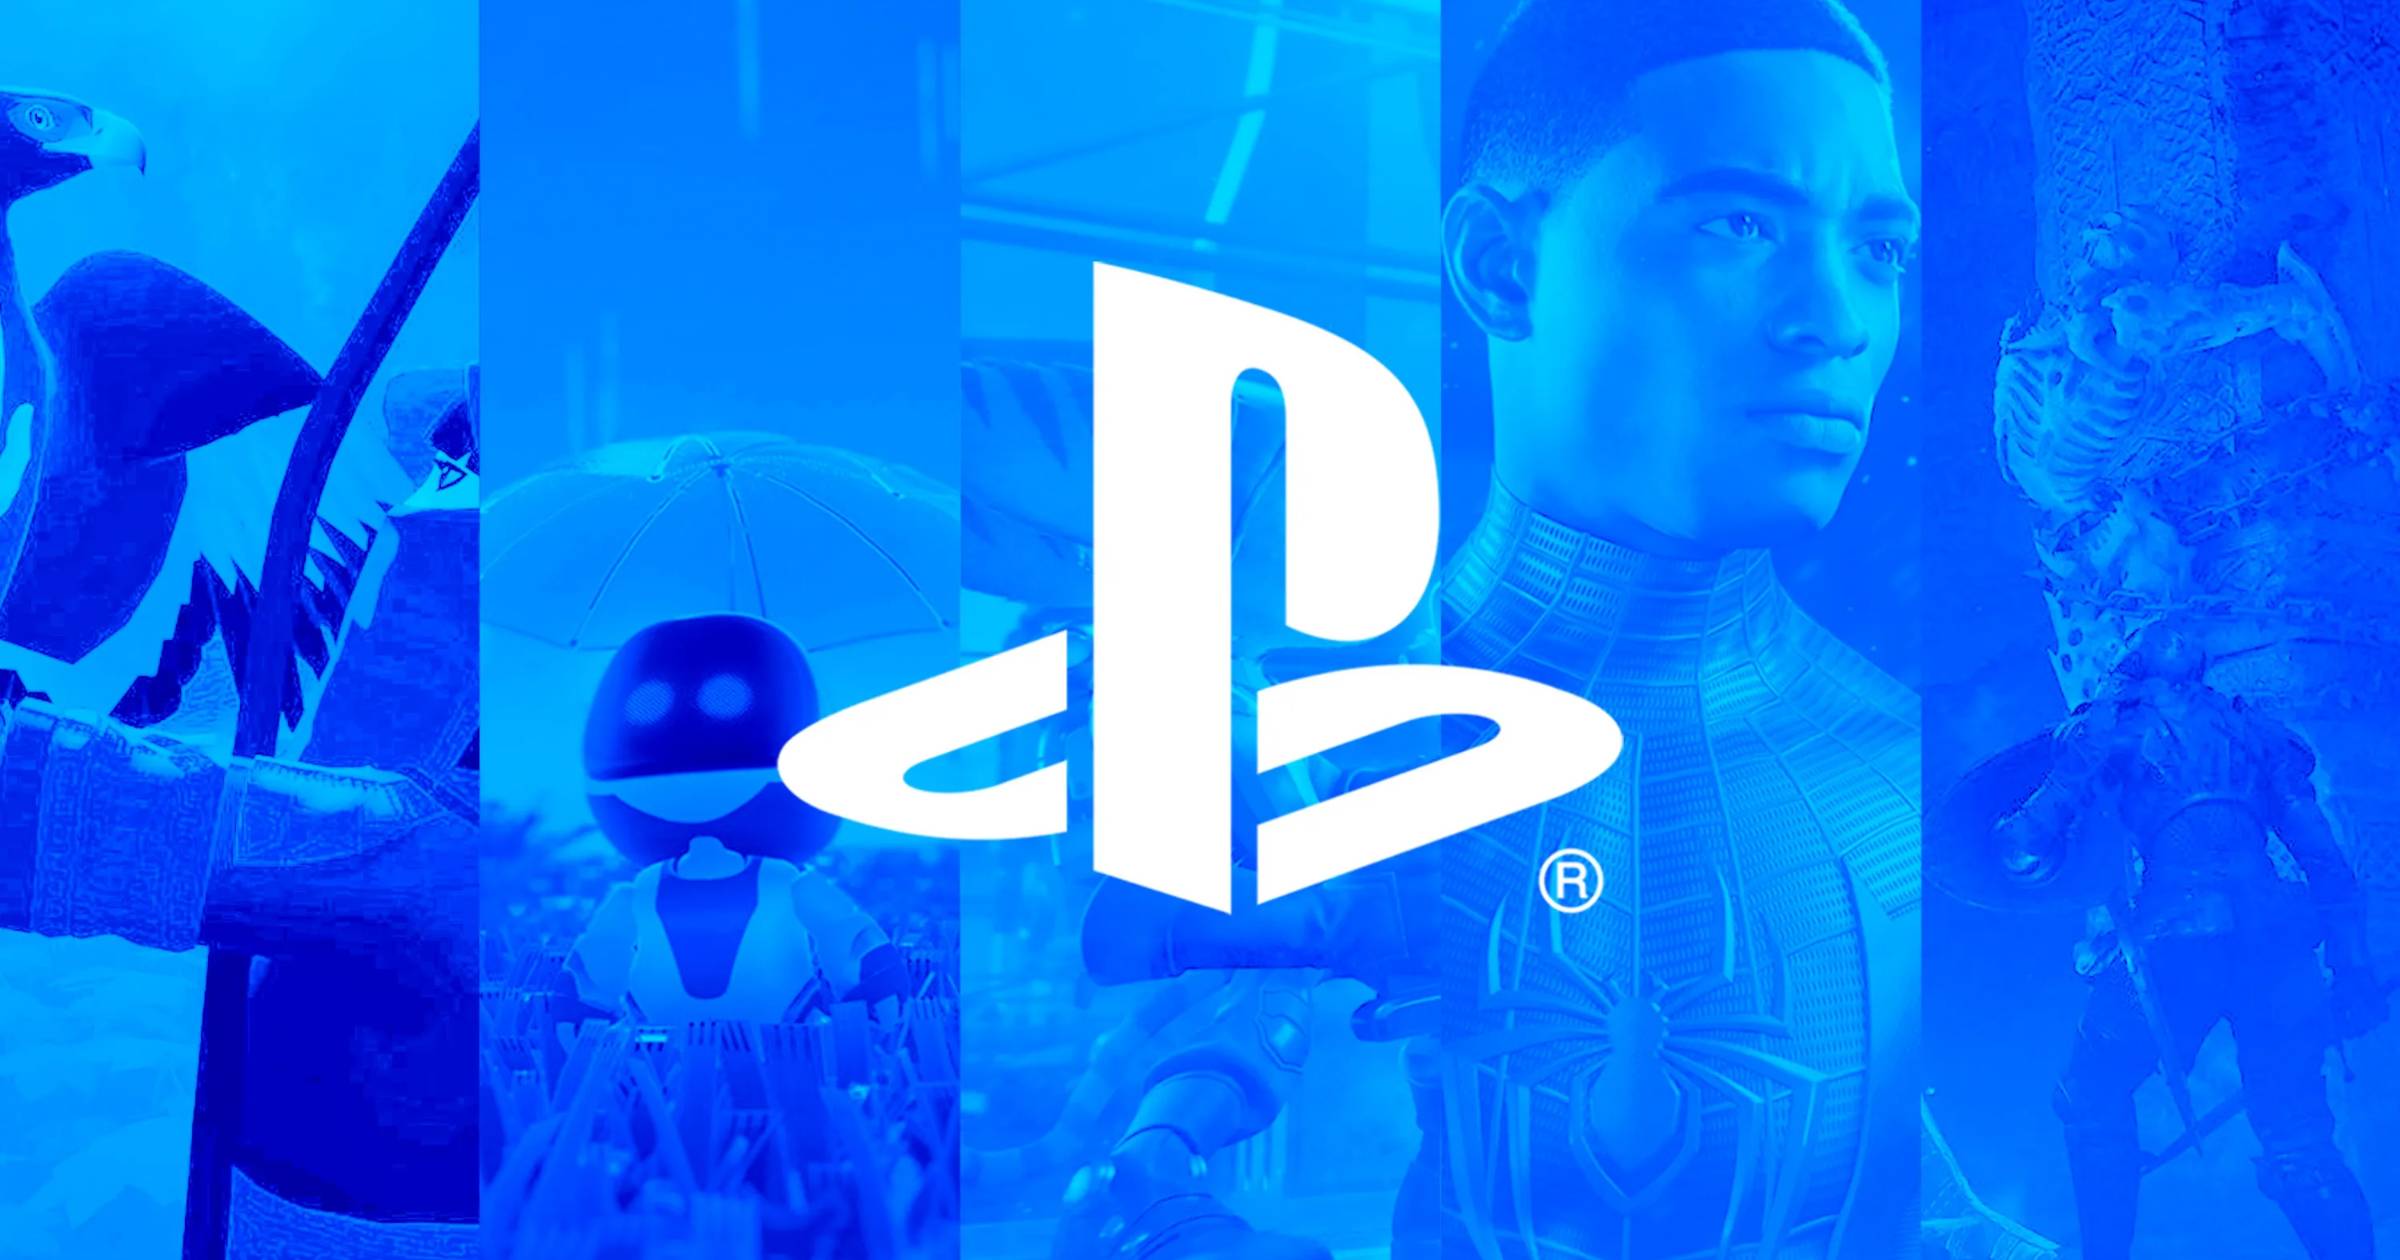 Best Free Games on PS4